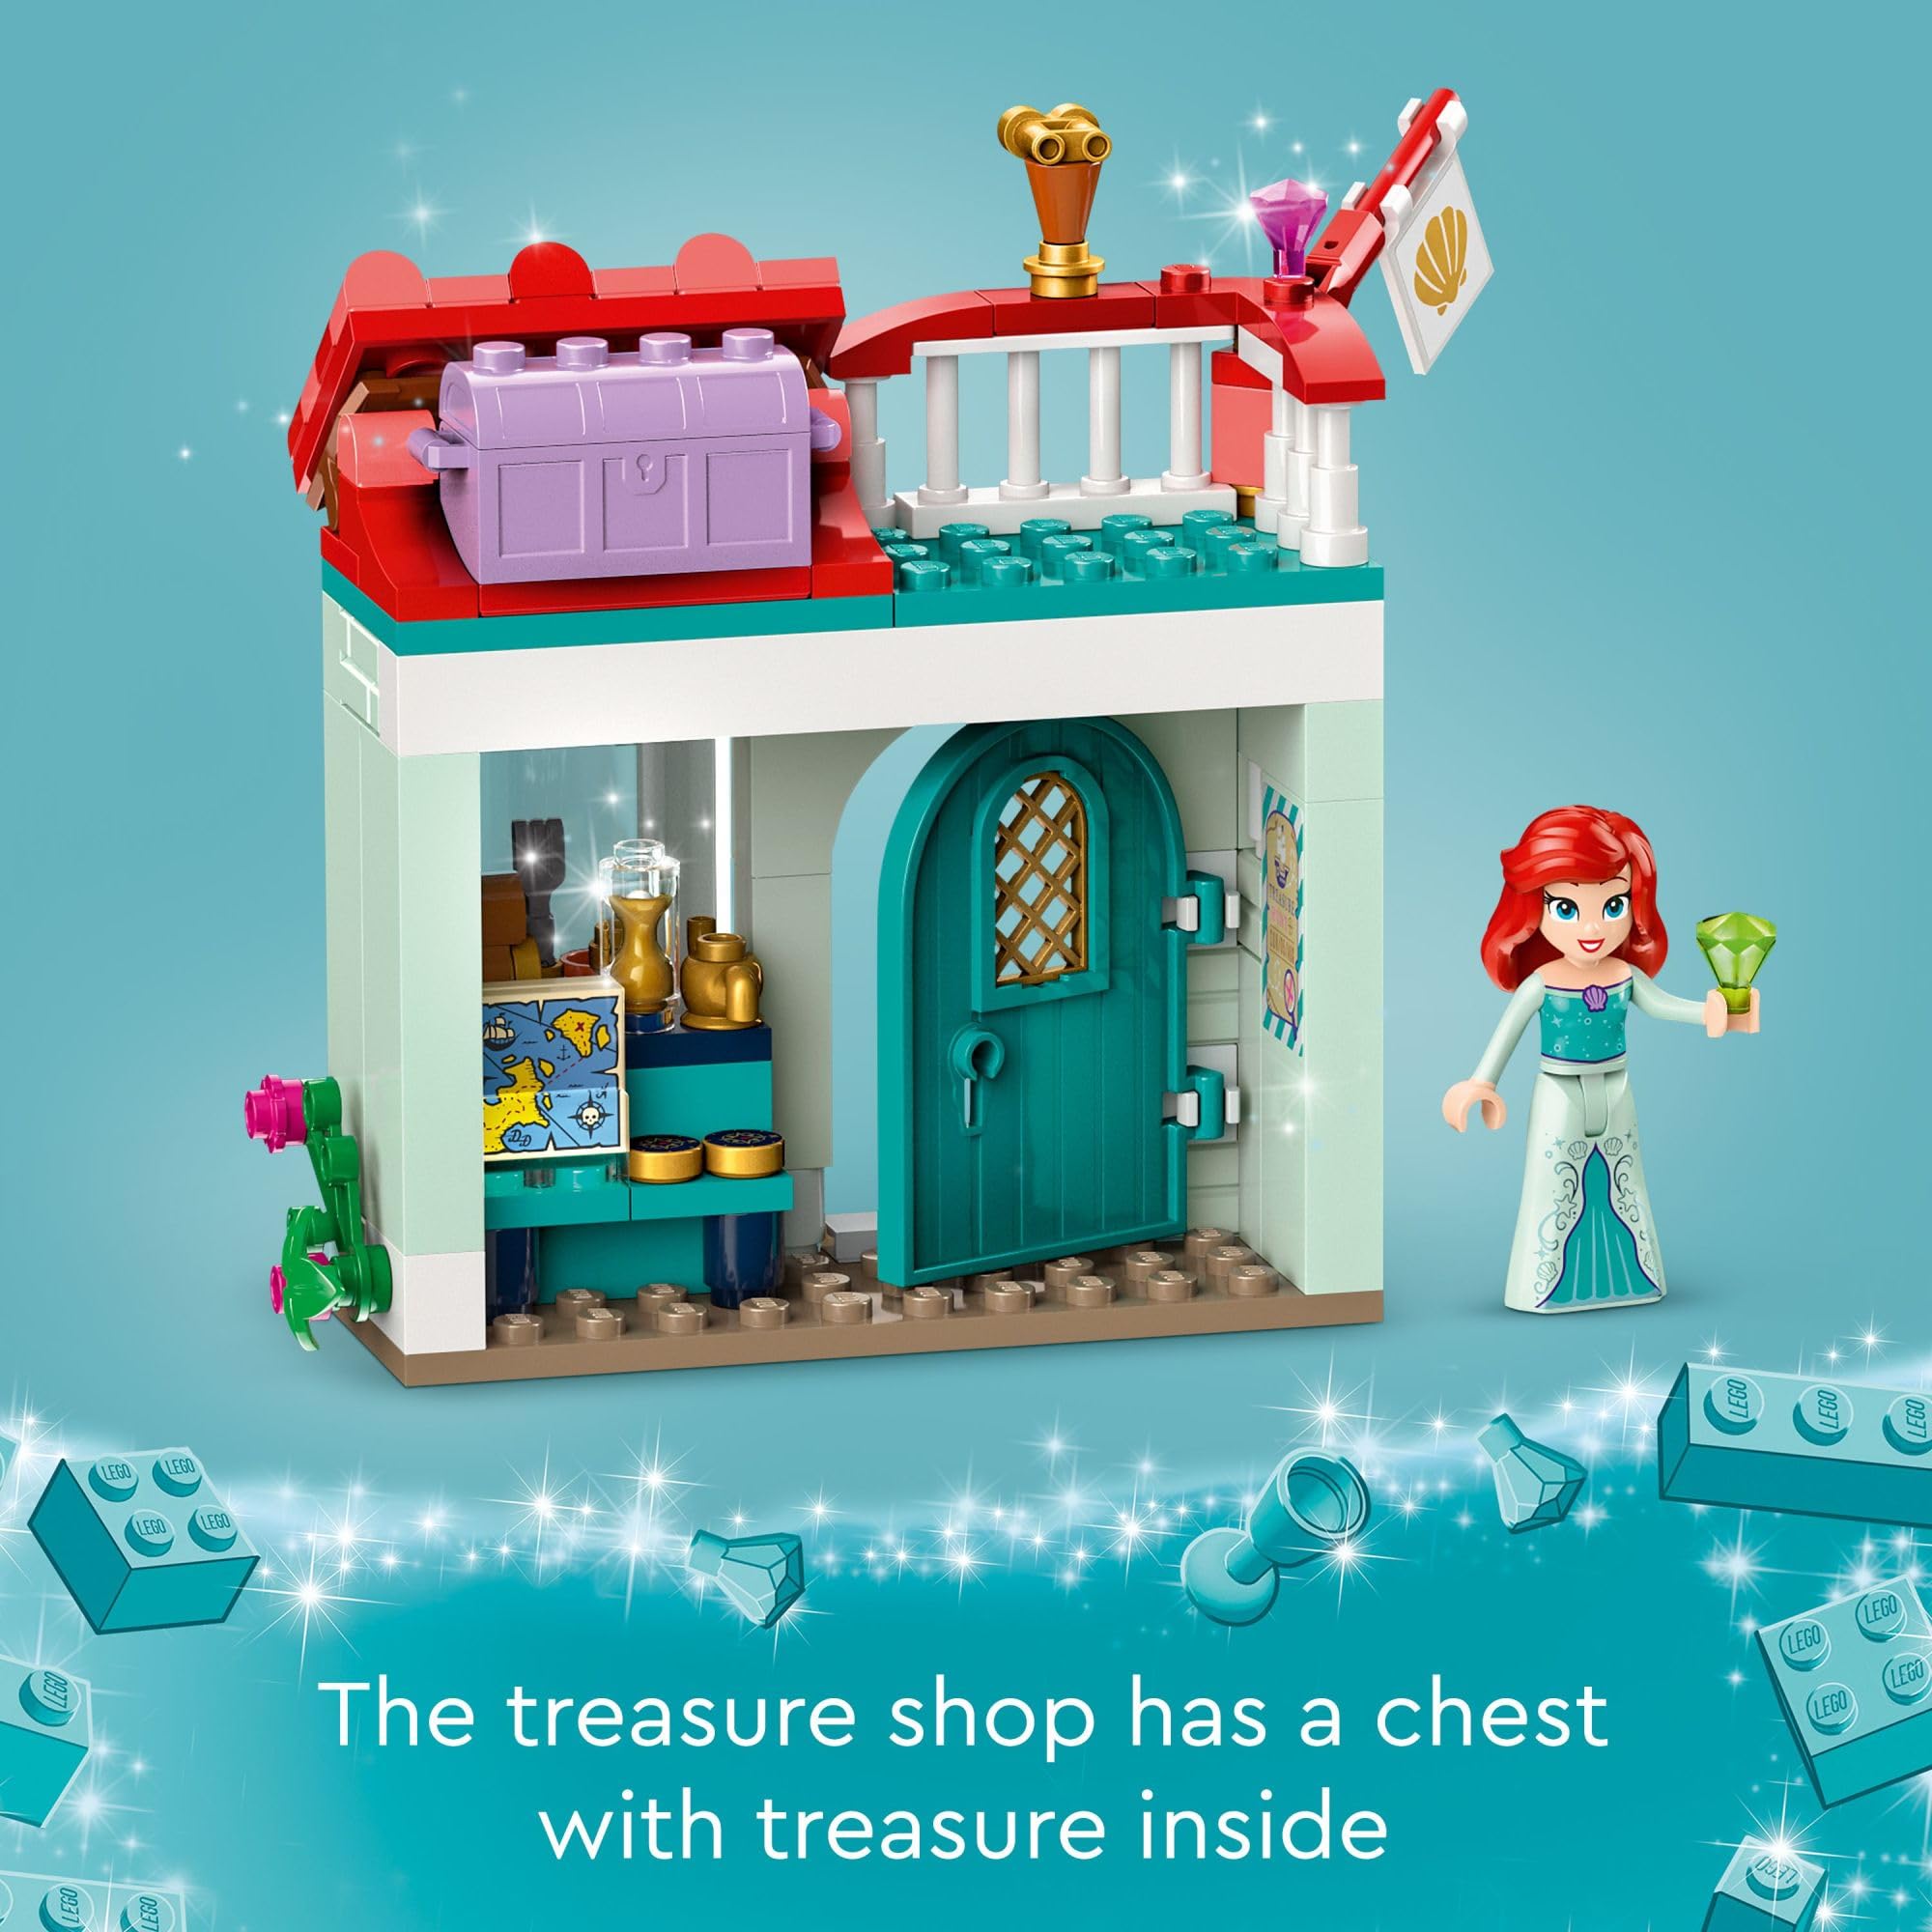 LEGO Disney Princess: Disney Princess Market Adventure, Building Playset Toy for Kids, Treasure Map and 4 Mini-Doll Figures, Fairy Tale Toy Gift for Girls and Boys Ages 6 Plus, 43246